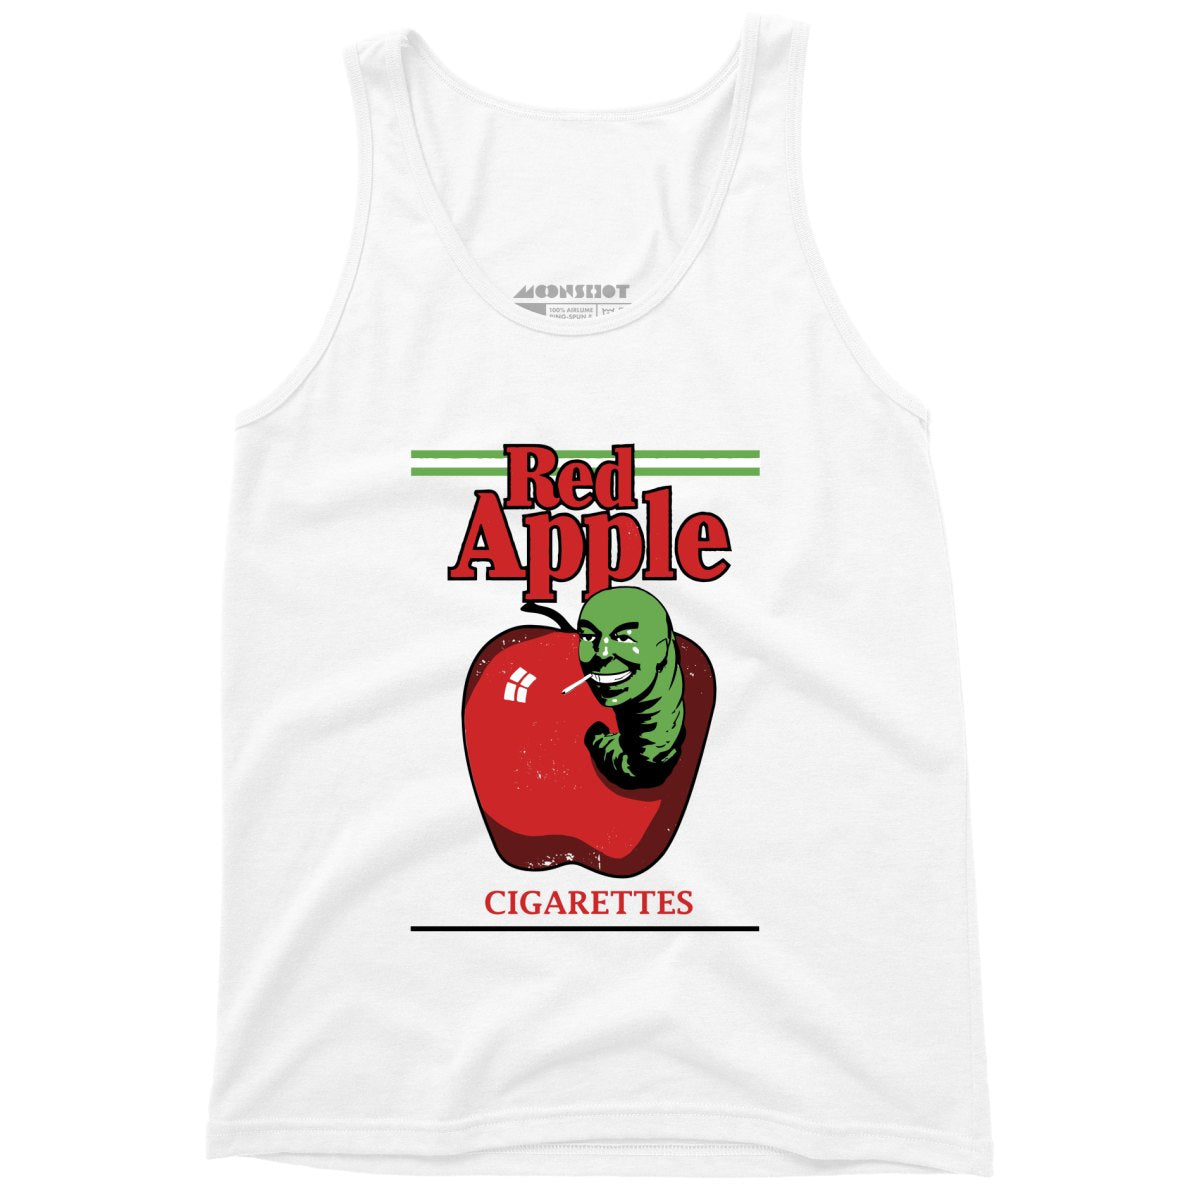 Red Apple Cigarettes - Unisex Tank Top